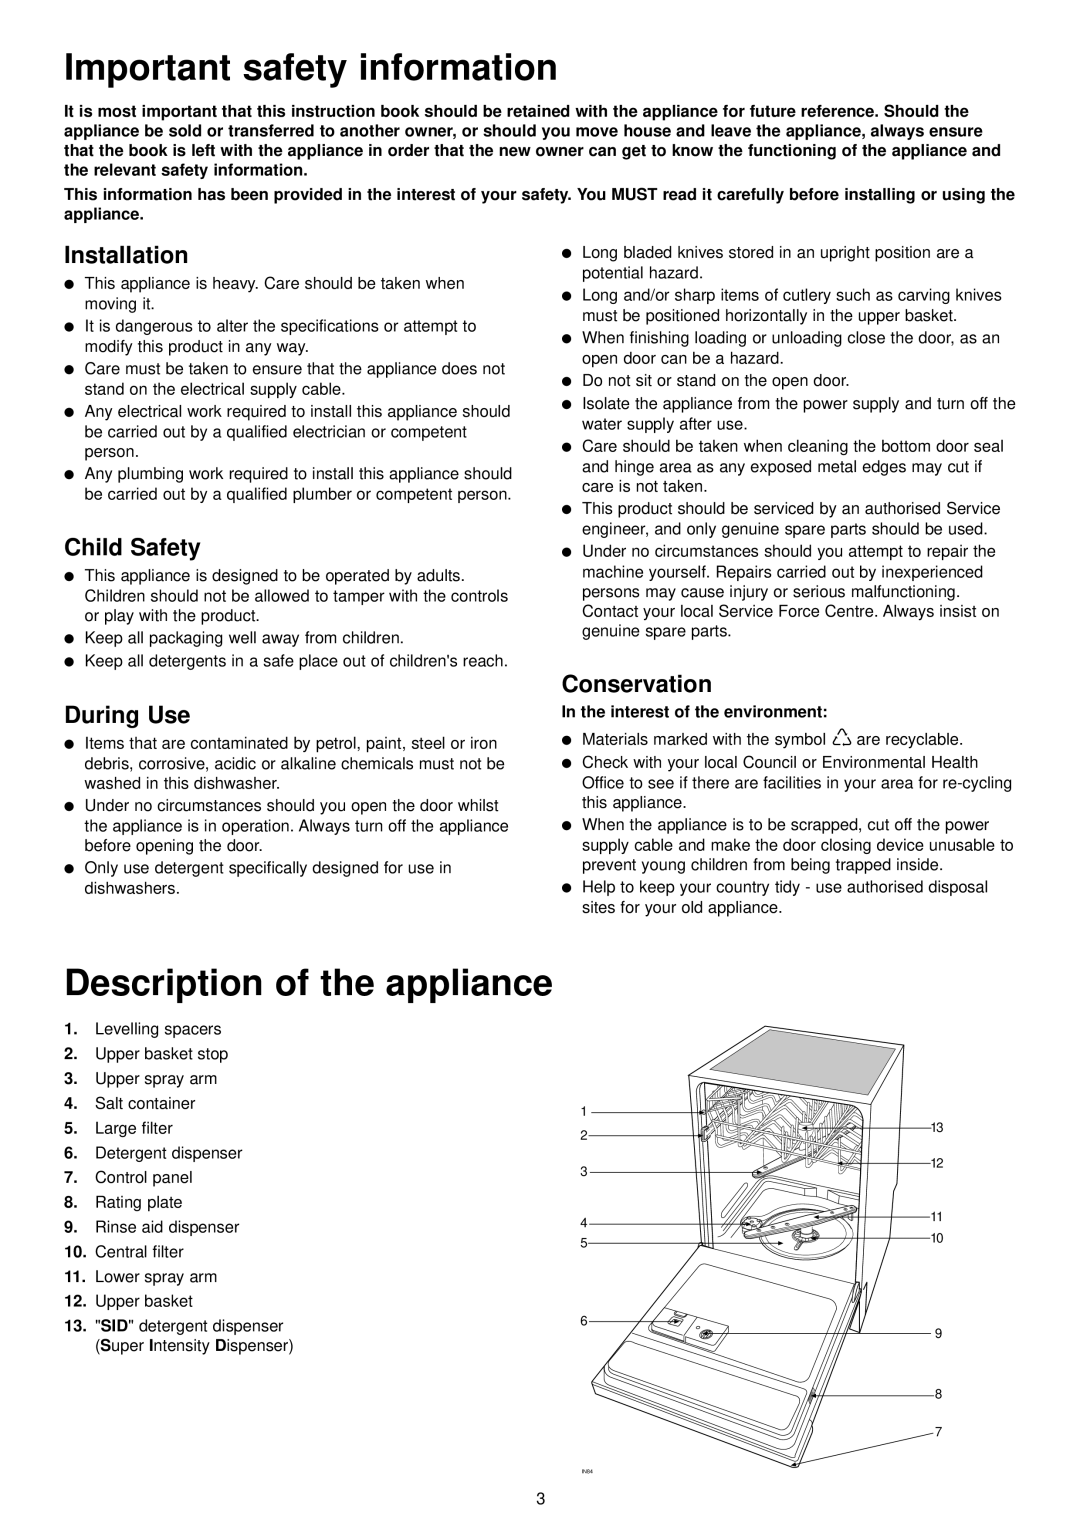 Zanussi ZDT 6894 manual Important safety information, Description of the appliance, Installation, Child Safety, During Use 